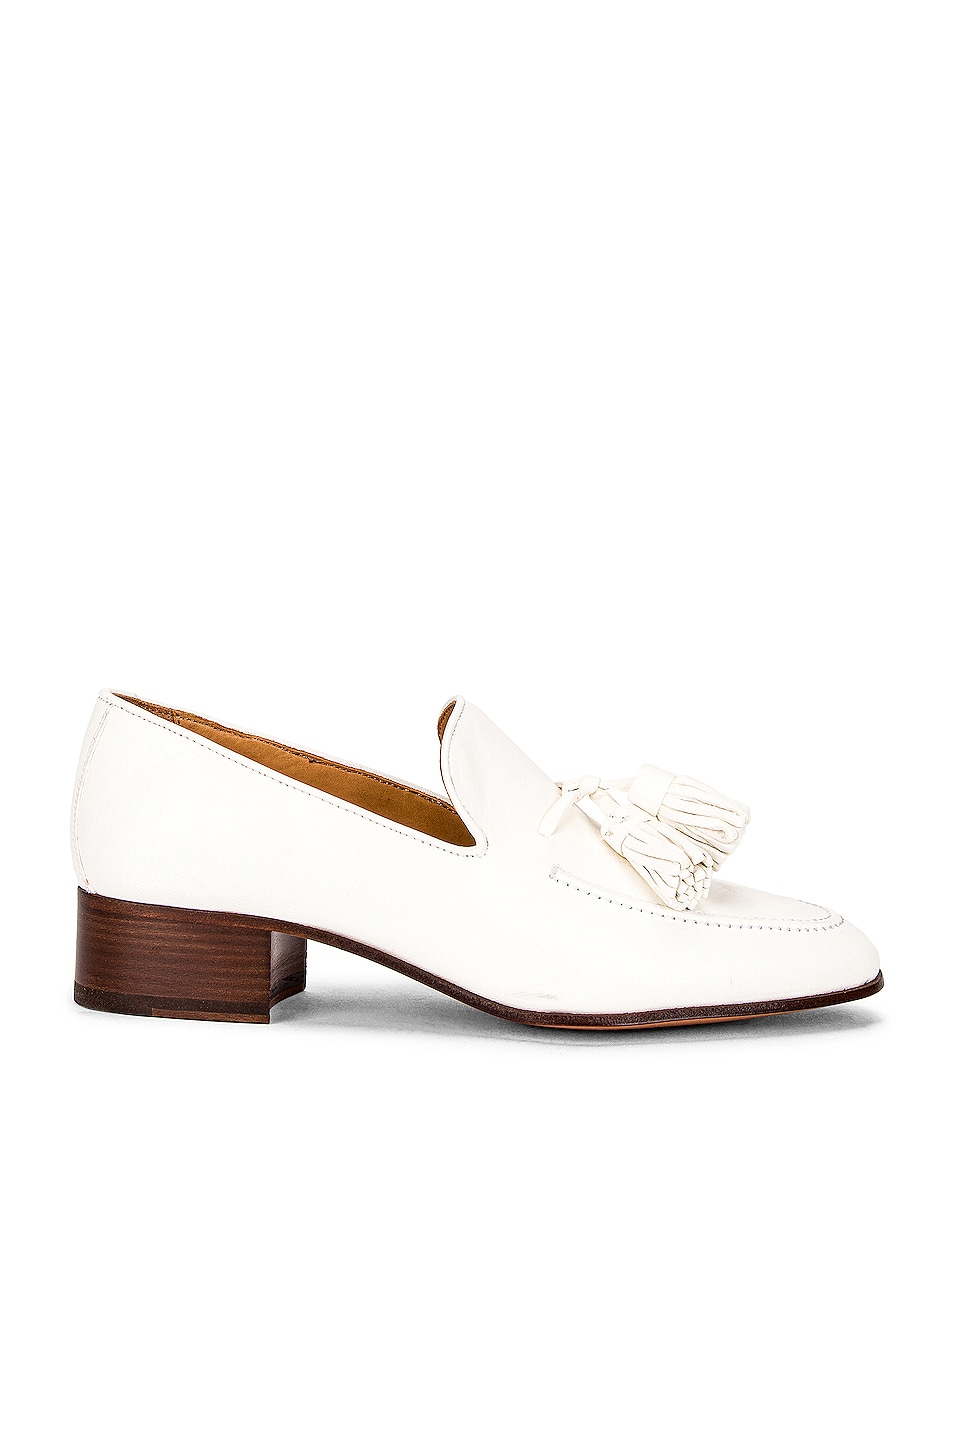 Image 1 of Loewe Pompon 40 Loafer in White